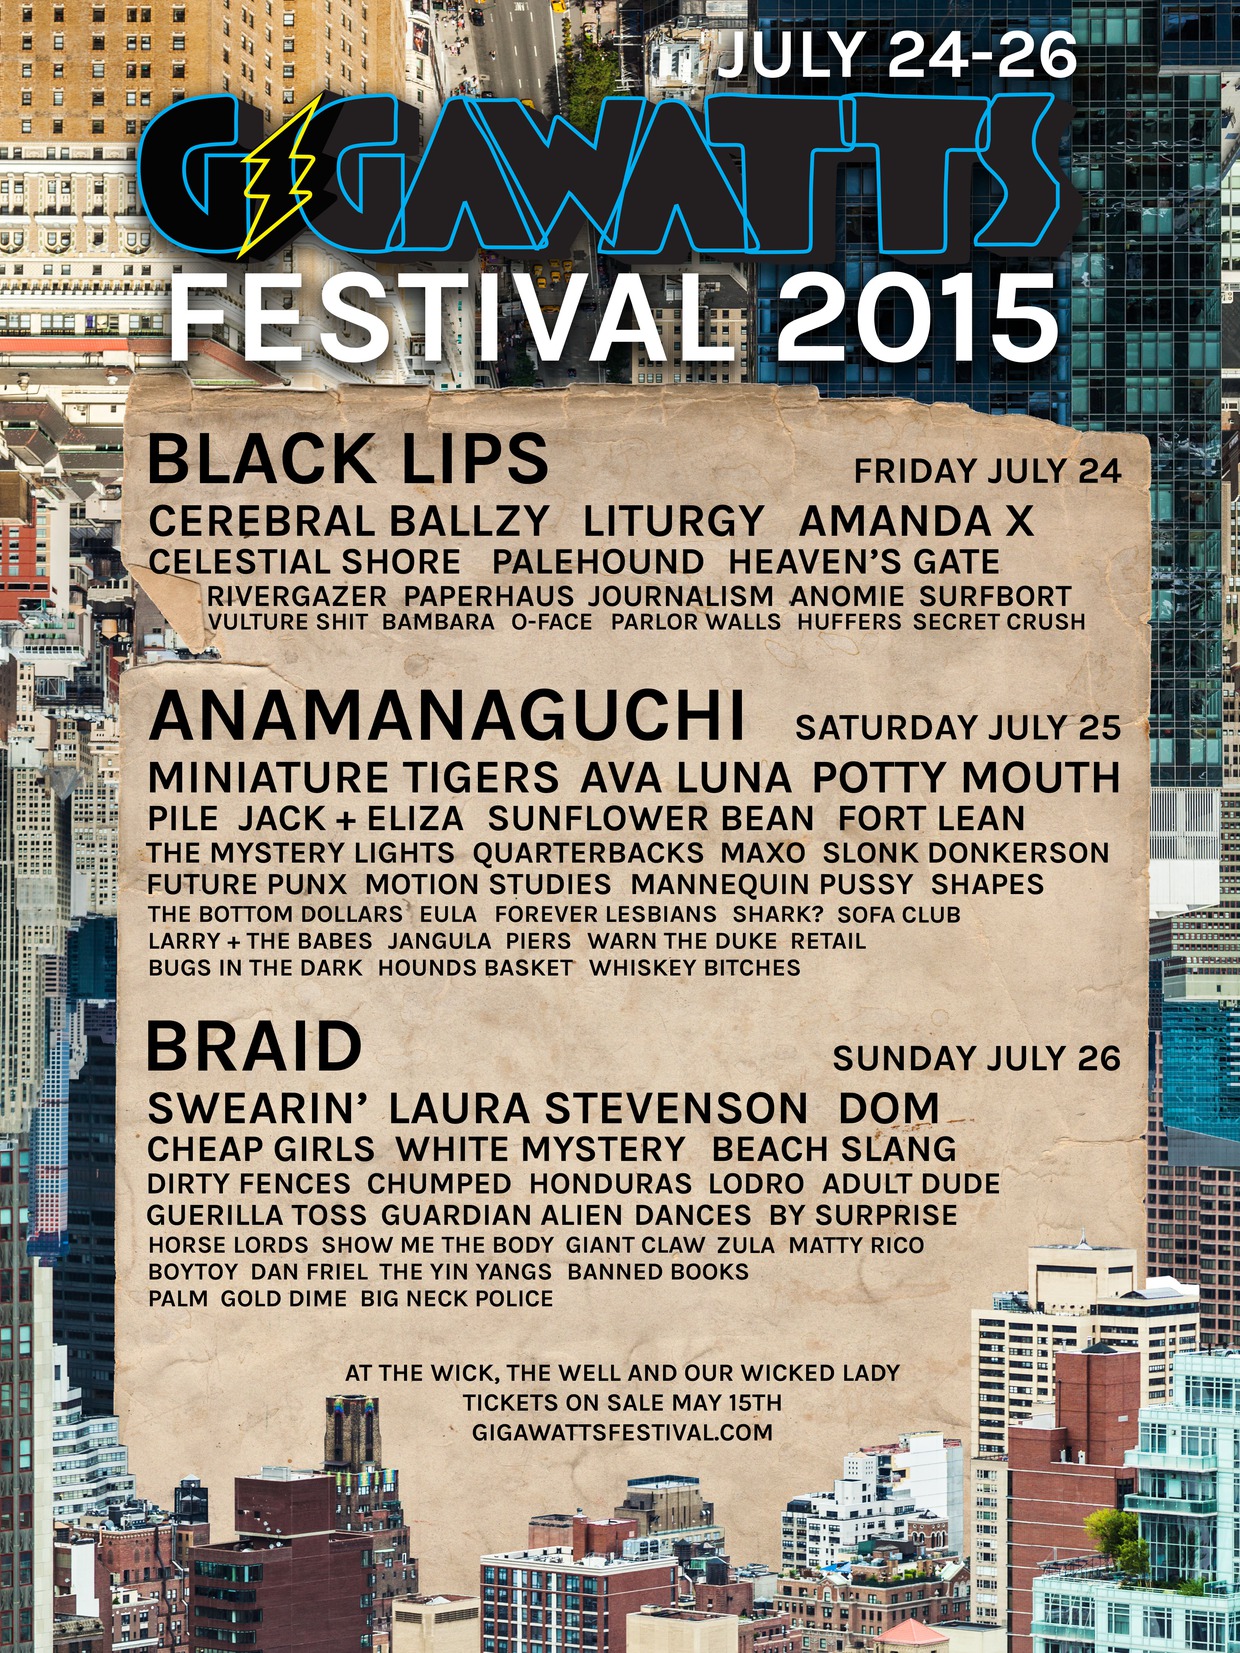 Gigawatts Festival Is Coming to East Williamsburg With Awesome 80+ Band Line Up (Black Lips, Anamaguchi & More)